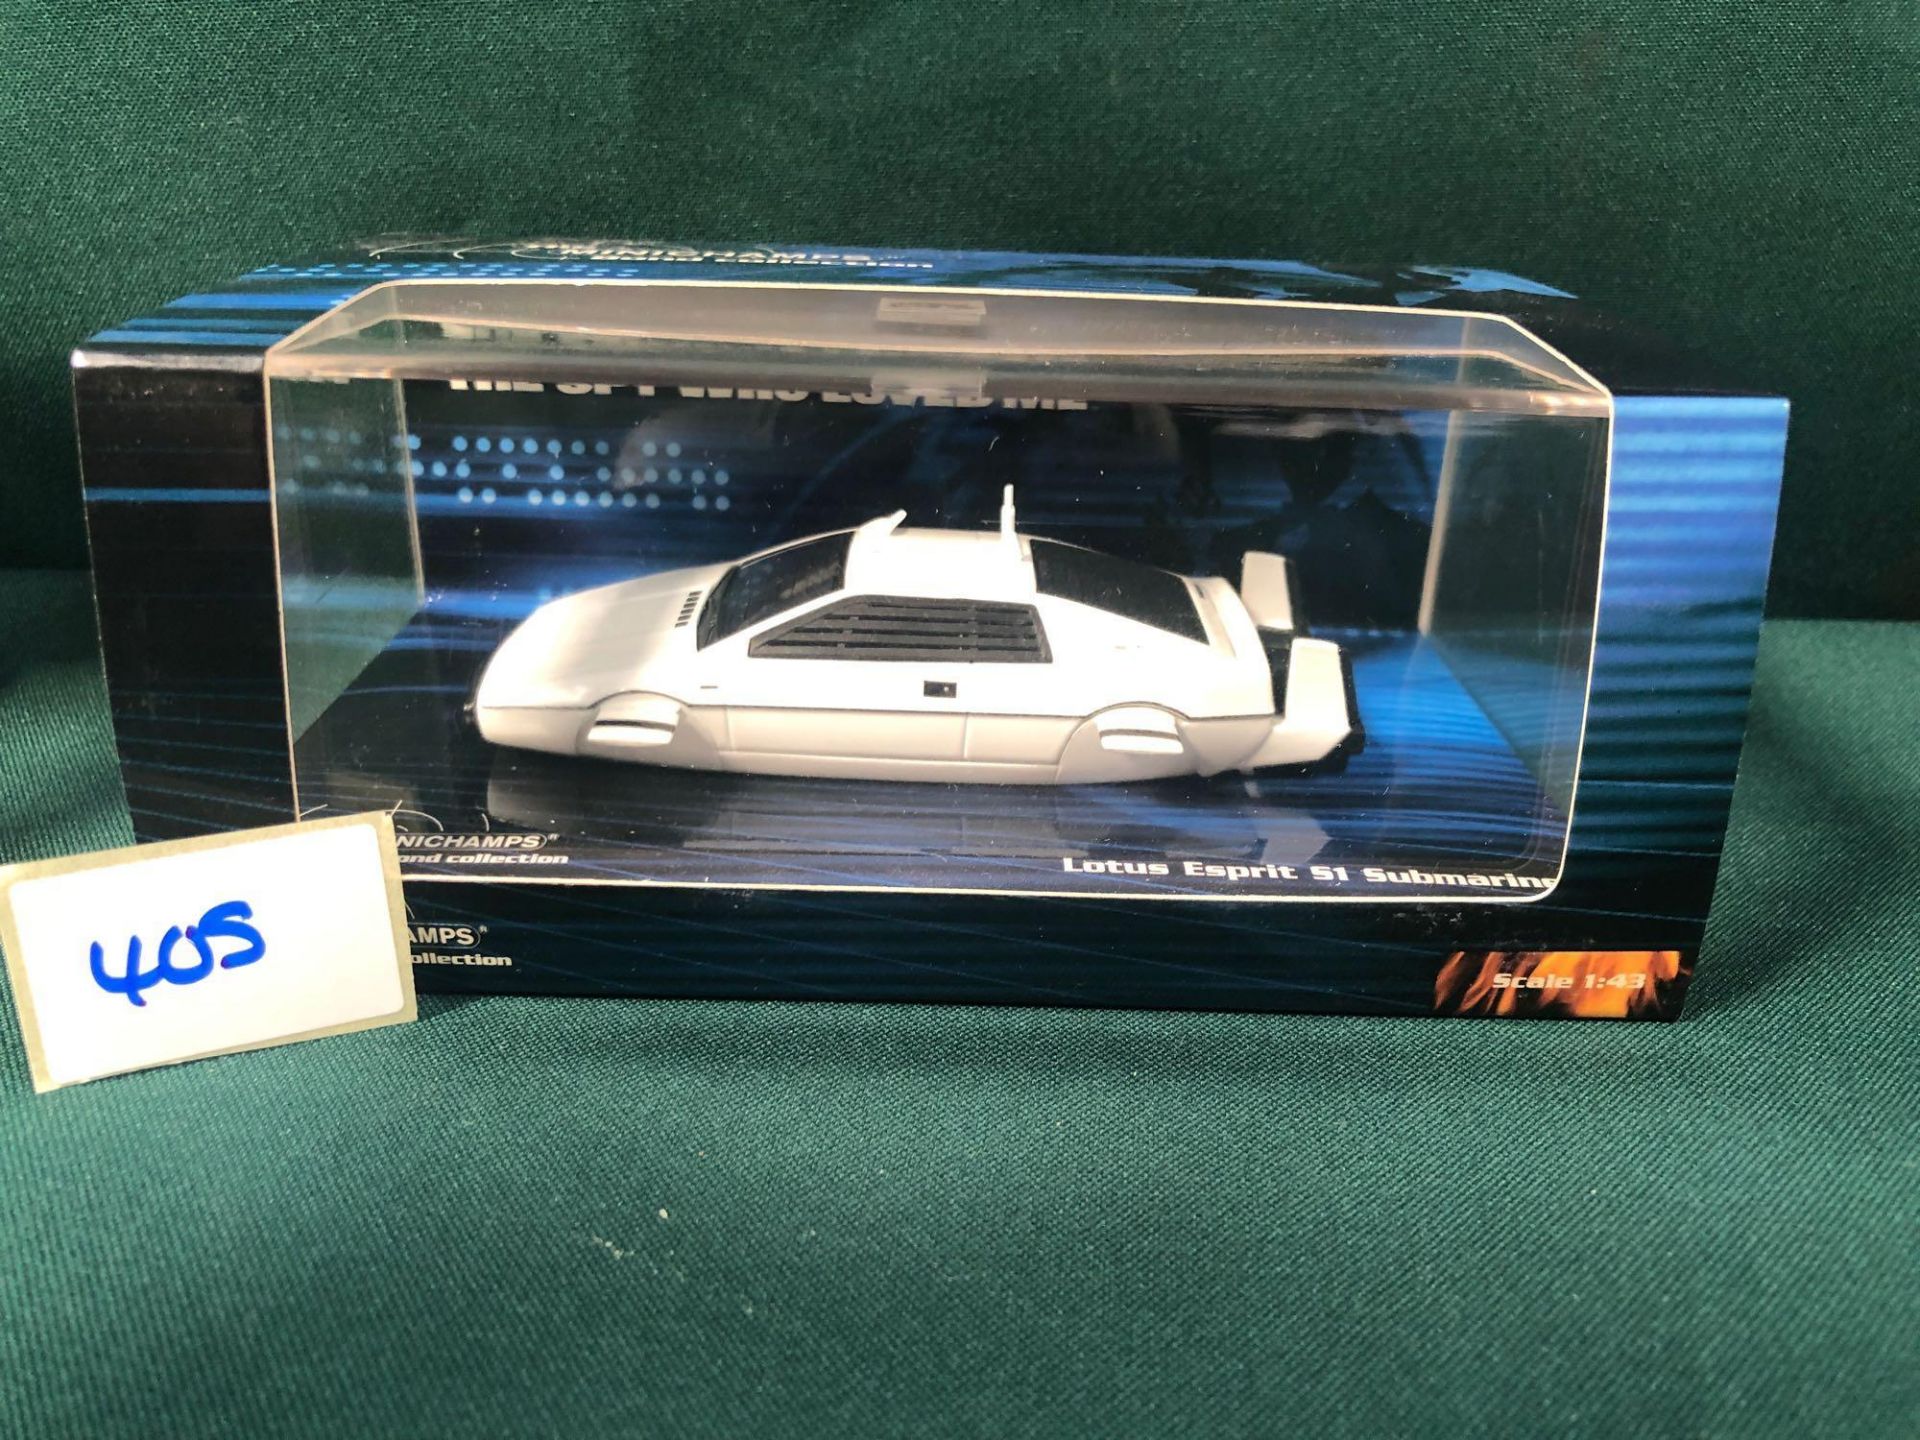 The Minichamps Bond Collection Diecast #400 135270 Lotus Esprit S1 Submarine From The Spy Who - Image 2 of 2